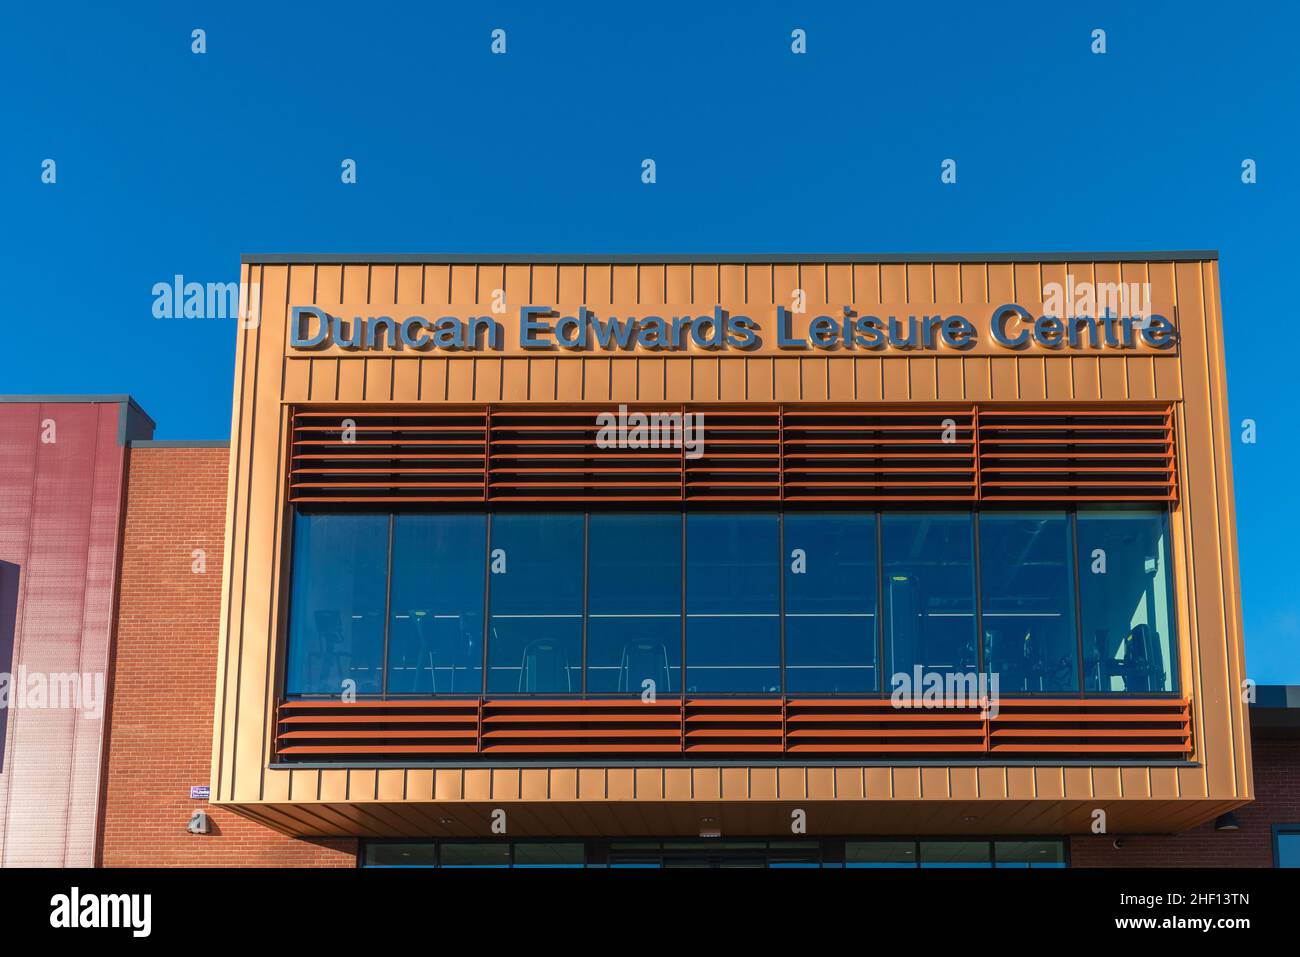 The newly built Duncan Edwards Leisure Centre in Dudley, West Midlands which opened on 24 January 2022 Stock Photo